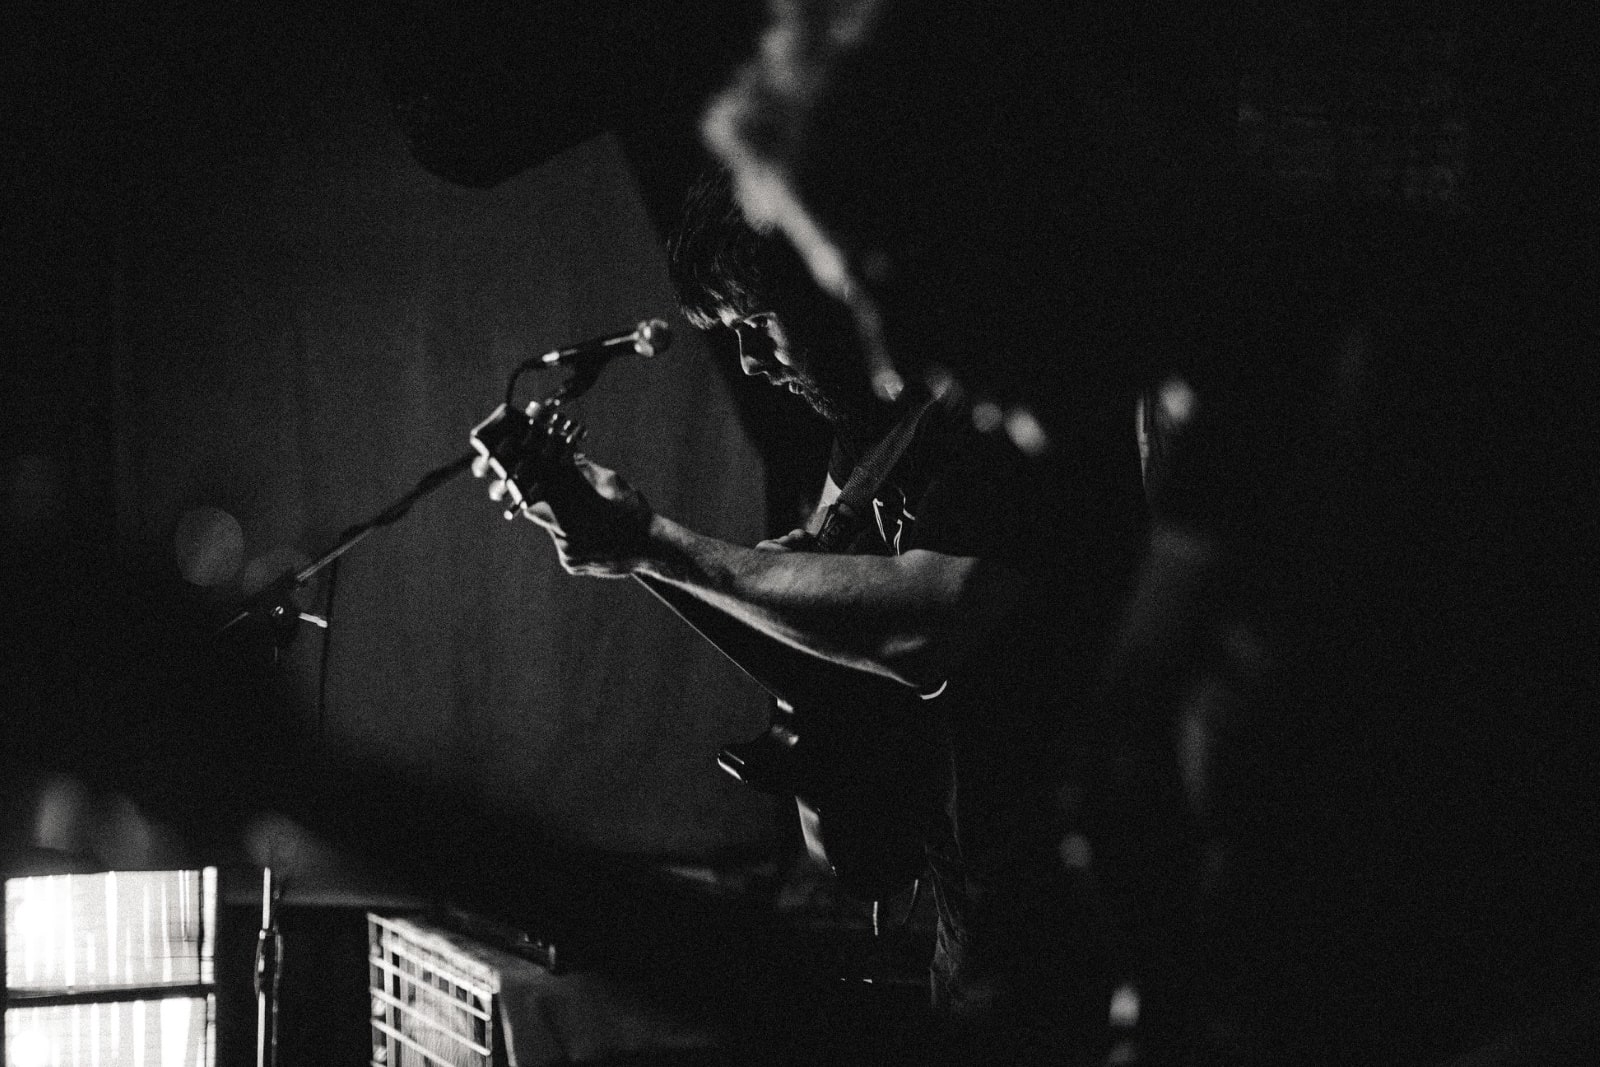 NOSTRA is a Latvian-French trio formed in Riga (Latvia) in 2016, drawing its musical influences from various genres, from post-rock and post-metal to cold wave, including sludge or doom jazz. The band has been immersed in a post-Soviet urban landscape scattered with crumbling buildings and abandoned industrial complexes. This ‘post’ environment where nature slowly sprawls through cracks, concrete and metallic edifices have been haunting Nostra’s music. After the release of Transmission(s) (EP, 2018) and Nemoralis (LP, 2019), Nostra is coming back with a two-title single: Law of the Tongue. Grus and Law of the Tongue are the songs capturing at the closest the diverse influences of the members. Melancholic guitars mesh with cold basslines and bursting drums for an homage to a vanished past. During the first year, all the income from the sales of the EP on Bandcamp will be donated to the Latvian Fund for Nature (Latvijas Dabas Fonds), a Latvian organization that is acting for the protection and conservation of nature. Law of the Tongue was recorded, mixed and mastered by Nicolas Gavoille in Riga. Asked about their specific cold wave tinged post rock stylistics, the band's guitarist Harijs comments: "I think it is about doing what feels right at the moment, following musical impulses and seeing where they lead, not really restricting oneself. That, coupled with an overarching sense of what atmosphere you want to achieve, usually yields some interesting results." "I am not a post-rock guy." - adds bassist Xavier. "I am from a different kind of “post”, “post-punk”. My influences lie in the 1980s, and bands such as The Cure, Dead Can Dance. That’s why I often use flanger or reverb. I also try to keep the basslines distinct, as much as possible from the guitars." NOSTRA's drummer Einars, on the other hand, doesn't consider drums to be a strictly rhythmic instrument. "Drums sing, they are melodic, each of the individual parts of the drumset produces its own note." - he says. "So there’s quite a huge melodic potential. In Nostra, I usually start working on a song by zeroing in on the feel. Imagining how fast it should feel. Then listening for any melody, chord changes, notes to emphasize, how the dynamics should be. To follow the guitar and emphasize the bass at certain points or try to figure out a pattern where I could merge them both together." Photo by C E Wellings. Eden Killer Whale Museum Collection 𝑇ℎ𝑒 𝑡𝑖𝑡𝑙𝑒 𝐿𝑎𝑤 𝑜𝑓 𝑡ℎ𝑒 𝑇𝑜𝑛𝑔𝑢𝑒 𝑟𝑒𝑓𝑒𝑟𝑠 𝑡𝑜 𝑂𝑙𝑑 𝑇𝑜𝑚, 𝑎𝑛 𝑜𝑟𝑐𝑎 𝑤ℎ𝑜, 𝑤𝑖𝑡ℎ ℎ𝑖𝑠 𝑝𝑜𝑑, 𝑢𝑠𝑒𝑑 𝑡𝑜 ℎ𝑢𝑛𝑡 𝑤ℎ𝑎𝑙𝑒𝑠 𝑎𝑙𝑜𝑛𝑔 𝑤𝑖𝑡ℎ ℎ𝑢𝑚𝑎𝑛𝑠. 𝑇ℎ𝑒 ‘𝑙𝑎𝑤’ 𝑖𝑠 𝑡ℎ𝑒 𝑎𝑟𝑟𝑎𝑛𝑔𝑒𝑚𝑒𝑛𝑡 𝑡ℎ𝑎𝑡, 𝑜𝑛𝑐𝑒 𝑡ℎ𝑒 𝑤ℎ𝑎𝑙𝑒𝑠 𝑤𝑒𝑟𝑒 𝑘𝑖𝑙𝑙𝑒𝑑, 𝑡ℎ𝑒 𝑜𝑟𝑐𝑎𝑠 𝑐𝑜𝑢𝑙𝑑 𝑟𝑖𝑝 𝑜𝑓𝑓 𝑡ℎ𝑒 𝑡𝑜𝑛𝑔𝑢𝑒𝑠 𝑎𝑛𝑑 𝑜𝑡ℎ𝑒𝑟 𝑠𝑜𝑓𝑡 𝑡𝑖𝑠𝑠𝑢𝑒𝑠 𝑏𝑒𝑓𝑜𝑟𝑒 𝑡ℎ𝑒 𝑤ℎ𝑎𝑙𝑒𝑠 𝑤𝑒𝑟𝑒 𝑡𝑜𝑤𝑒𝑑 𝑎𝑤𝑎𝑦. Explains Xavier: "Aesthetically, there is an interesting dynamic in the picture. The spectator sees men and killer whales going in the same direction, apparently tending toward a common goal." "It is a certain nostalgia for a time that really only exists in your imagination. It is a romanticized version of the idea of man hunting alongside beast, instead of out-competing it and destroying its habitat.’ - concludes Harijs. Photo by Olivier de Rycke, olivierderycke.com GRUS Harijs: A song that is more of a love letter. Both to someone specific and to a feeling as a whole; a simultaneous celebration and longing for careless, sunlit times in both the past and future. The definition is quite abstract, but in all honesty, most of our songs start as these little intangible flickers of emotions that don’t quite have a name for them yet, which in this case was the very intro part. Everything else is built on top of it. Einars: "Grus” provides the feeling of being swept up in the air and then just floating around majestically. It’s especially noticeable towards the middle of the song and also the end, where I tried to come up with a drum part that fills all the possible space. The result is a barrage of notes on the toms and cymbals. To me it’s almost like simulating a whirlwind. One that’s strong enough to take you up in the air, let you enjoy the beautiful view and then land you down safely. Photo by Olivier de Rycke, olivierderycke.com Xavier: Both songs begin with relatively quiet basslines. The bass supports the guitar there, so Harijs can lay down his melodies. It is more about infusing the proper atmosphere before the “explosion”. The second part of the second is more “upbeat”. All the challenge is then to keep the song grooving and not having the modulation muddying the sound. So, I use a phaser effect instead of the traditional flanger. LAW OF THE TONGUE Harijs: This song revolves around sea and loss. In a broader sense, it portrays pining for a time that’s never truly existed, a romanticized version of a distant past. It also is about deep personal loss, about the sea that both gives and takes so selfishly. When arranging the guitar parts, I wanted to include both lead and backing elements into the same line, but retain this almost black metal vibe to some parts. I love the challenge of trying to fill the sonic space with just one guitar. Photo by Olivier de Rycke, olivierderycke.com Einars: “Law of the Tongue” makes me imagine it as a series of flashbacks, memories. Each of the sections of the song symbolizing a story, emotion, feeling. Drums are taking a bit of a back seat in this song by trying not to do too much and solidify, back up the storytelling of guitar and bass. Both guitar and bass have really solid, powerful melodies going on throughout the song. Xavier: A very enjoyable song to play with a good variety of bass riffs. Often, I play high notes, which can make the bass less audible, especially live because of the modulation. But I like how it meshes with the guitar. For this tune, a strong inspiration was Steven Severin (Siouxsie and the Banshees) and his lines on Cities in Dust. DESPOT music video, in support of the band's 2019 LP Nemoralis: Footage taken from Teinosuke Kinugasa’s movie, Kurutta ippêji (A Page of Madness) shot in 1926. Asked about their local music community Harijs admits that despite being a small community, the Latvian scene is vibrant. "Local bands like Tesa, (now defunct) Audrey Fall, VVZ, Tempus and A Farewell to Words have this northern post-Soviet tinge to their expressions. The local scene tends to be a bit more musically aggressive and abstract than others, yet it still manages to be breathtakingly captivating and evoking. I feel that this environment breeds a different disposition towards creating, one focused on portraying pain and beauty in equal measure." "Due to its relatively small size, everyone almost knows everyone else across musical genres." - concludes Xavier. "In addition to those mentioned by Harijs, bands such as Zidruns or Nikto are locomotives for many of us. We are glad for this emulation. We also benefit from the support of national radios and local concert venues, which have unfortunately been hit by COVID-related restrictions." Photo by Olivier de Rycke, olivierderycke.com